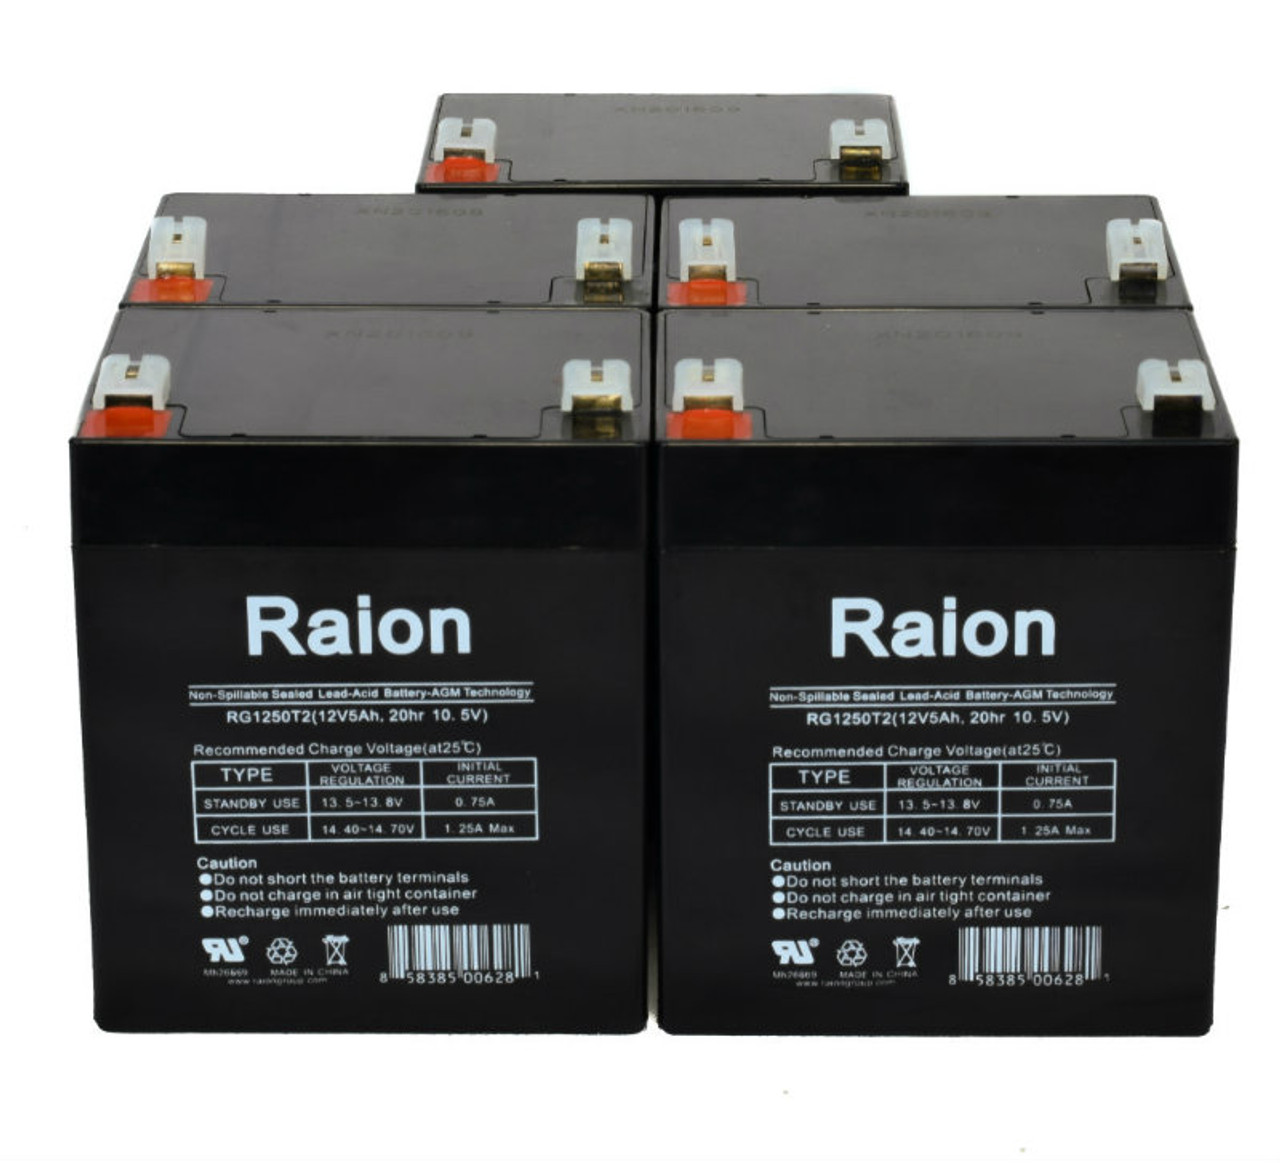 Raion Power RG1250T1 Replacement Battery for Mule PM1250 F1 - (5 Pack)